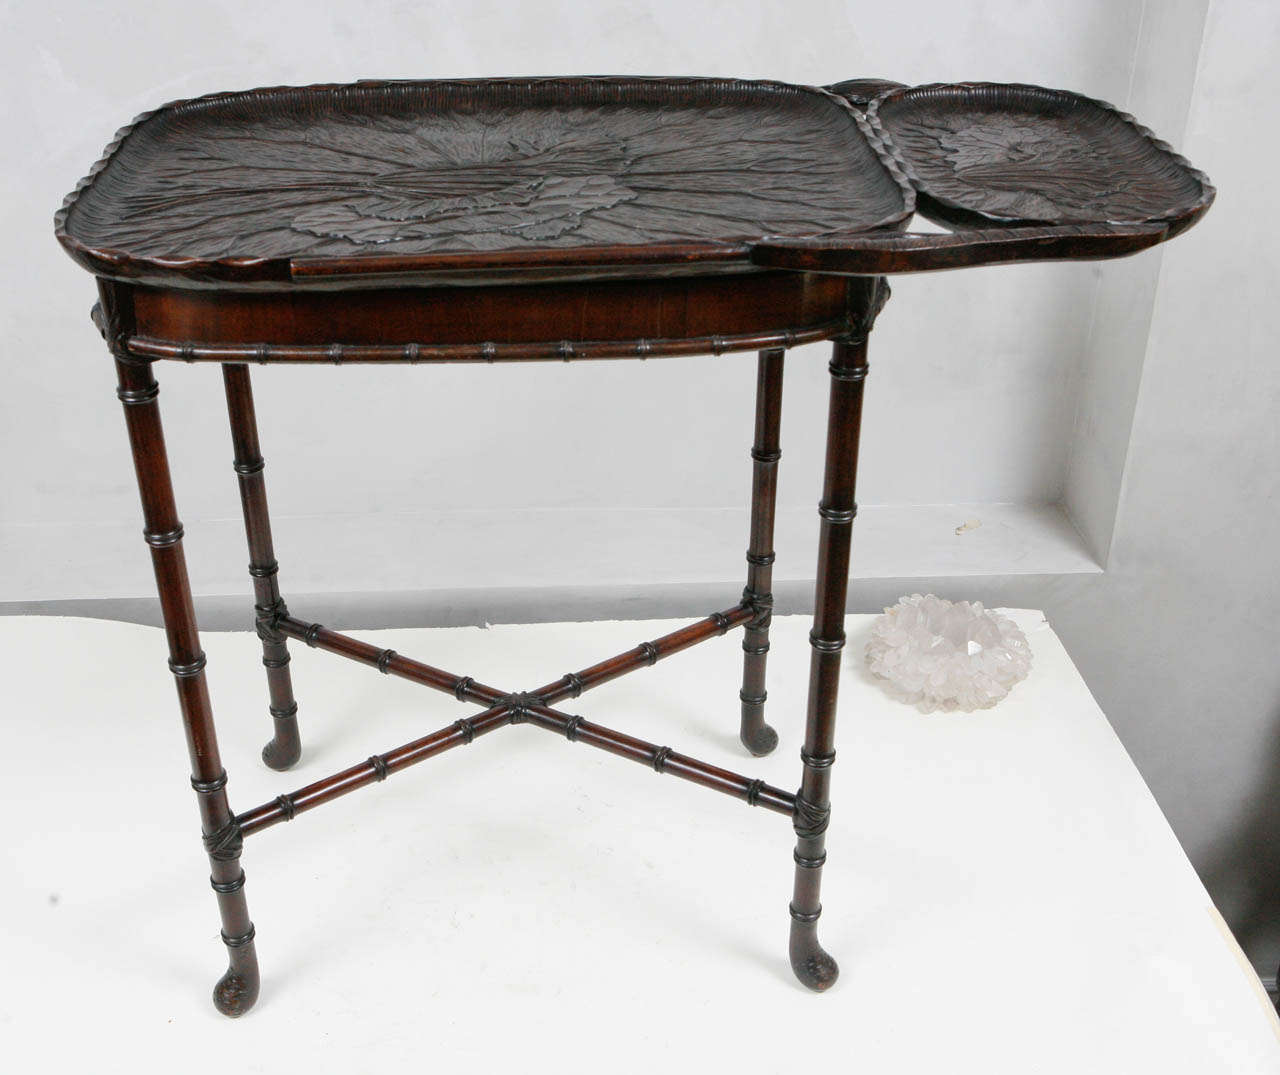 19th century Japanese Finely Carved Walnut Tray on later date Stand.